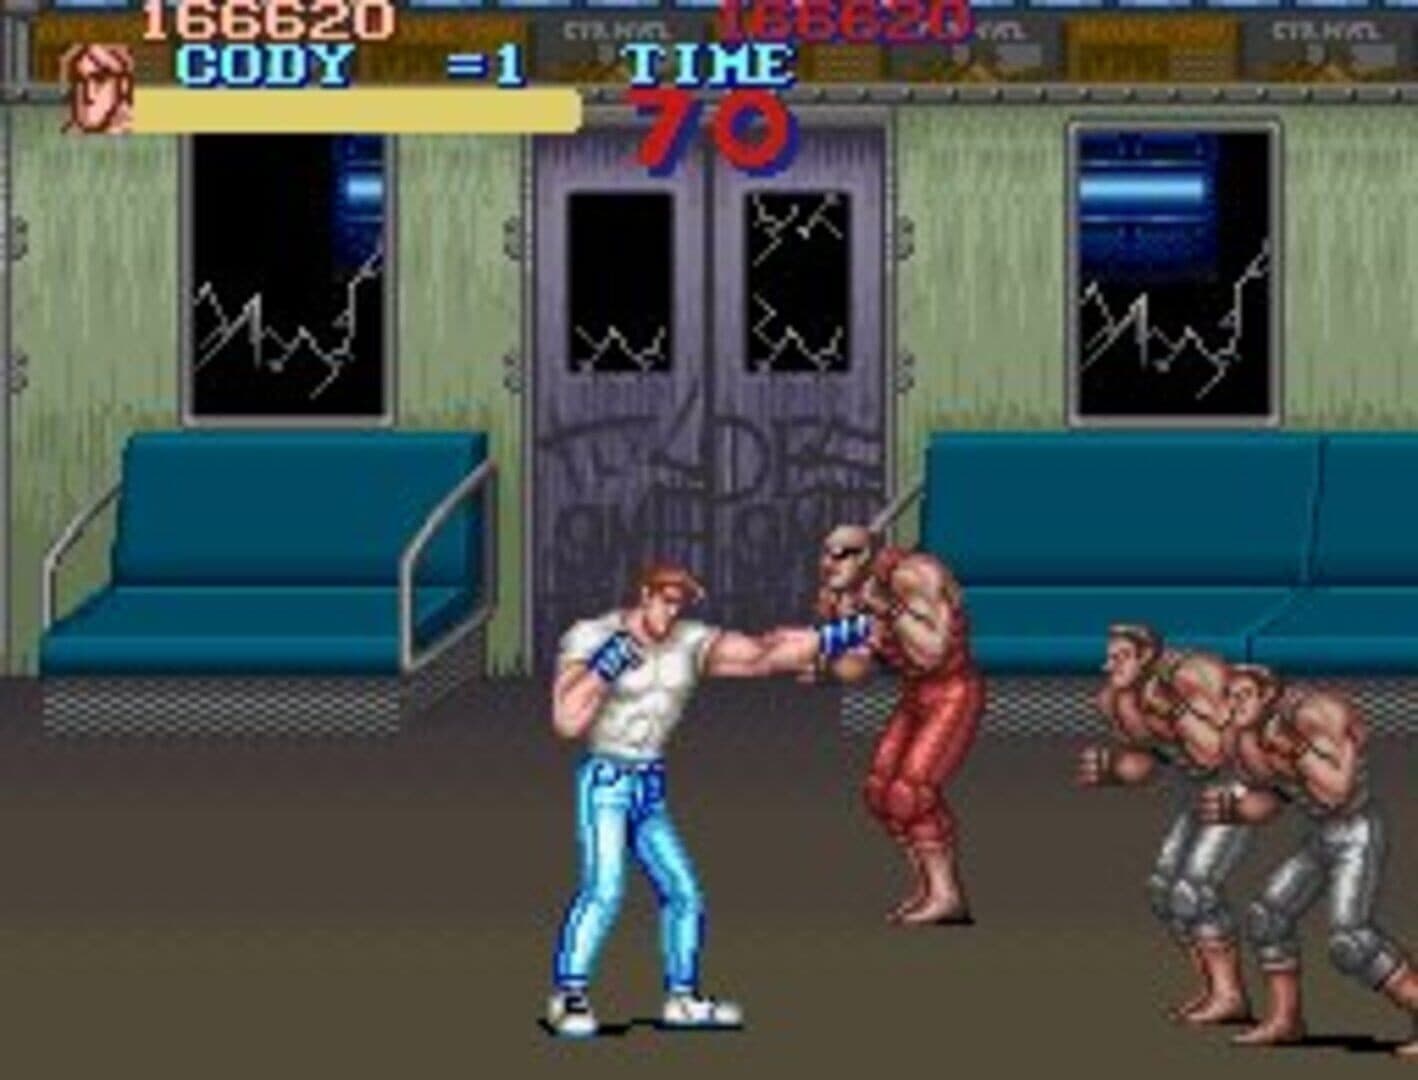 Final Fight Image